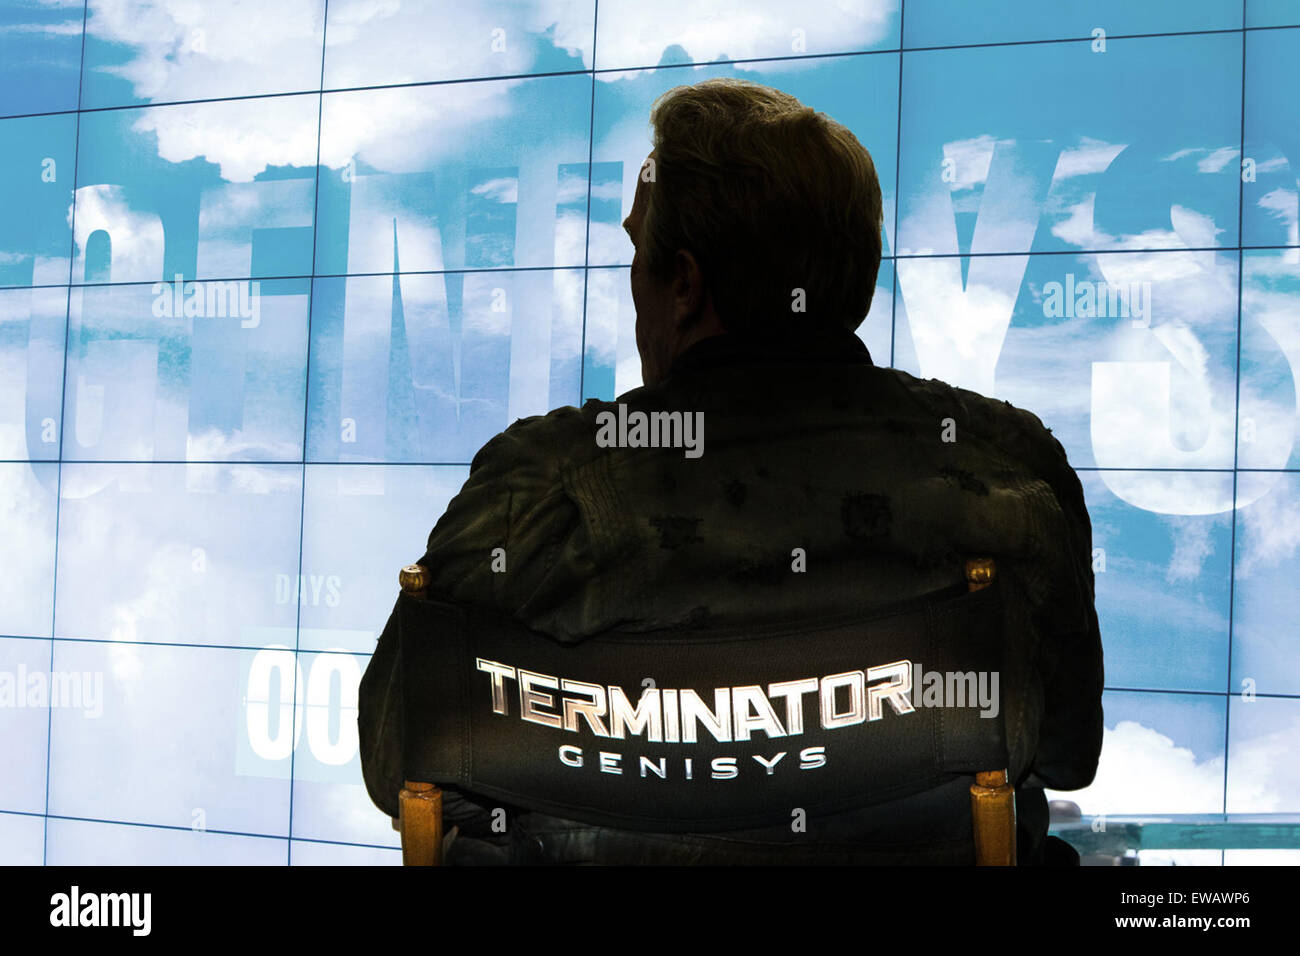 Terminator Genisys is an upcoming 2015 American science fiction action film directed by Alan Taylor and written by Laeta Kalogridis and Patrick Lussier. It is the fifth installment in the Terminator series and will serve as a retcon sequel to the series. Arnold Schwarzenegger reprises his role as the titular character. Stock Photo